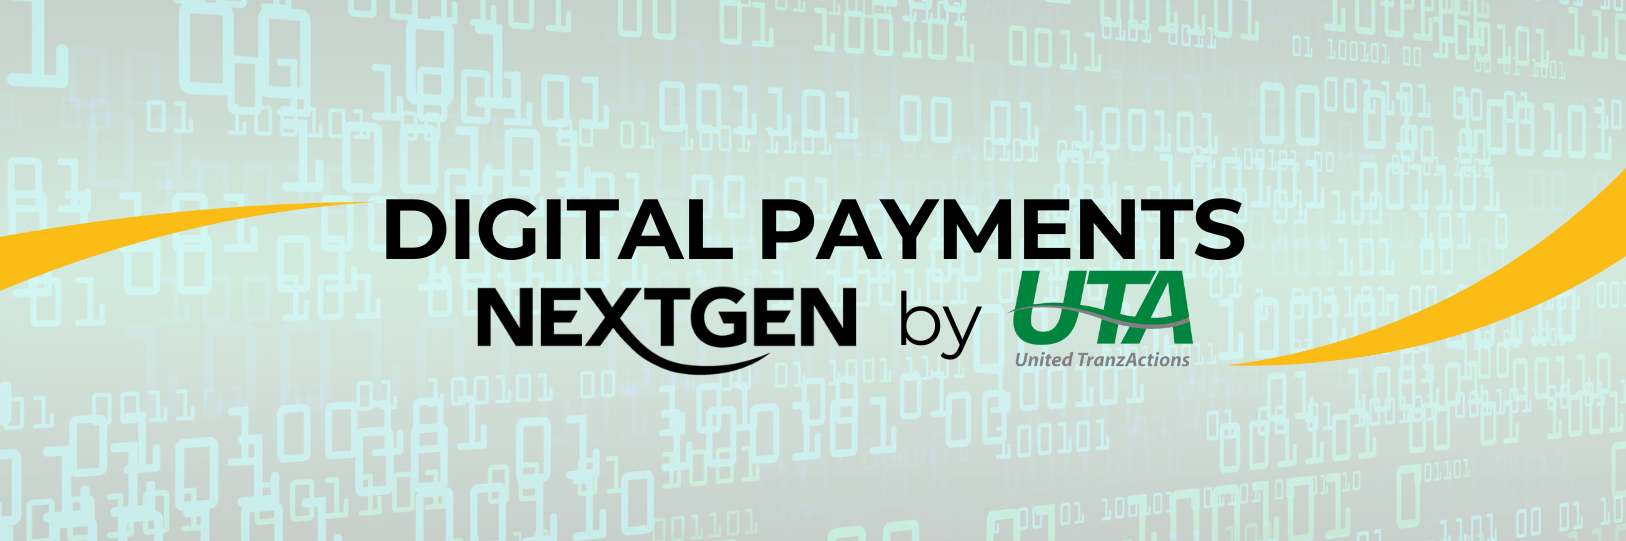 FREE Webinar: New Solutions to Transform Your Payment Processes with UTA